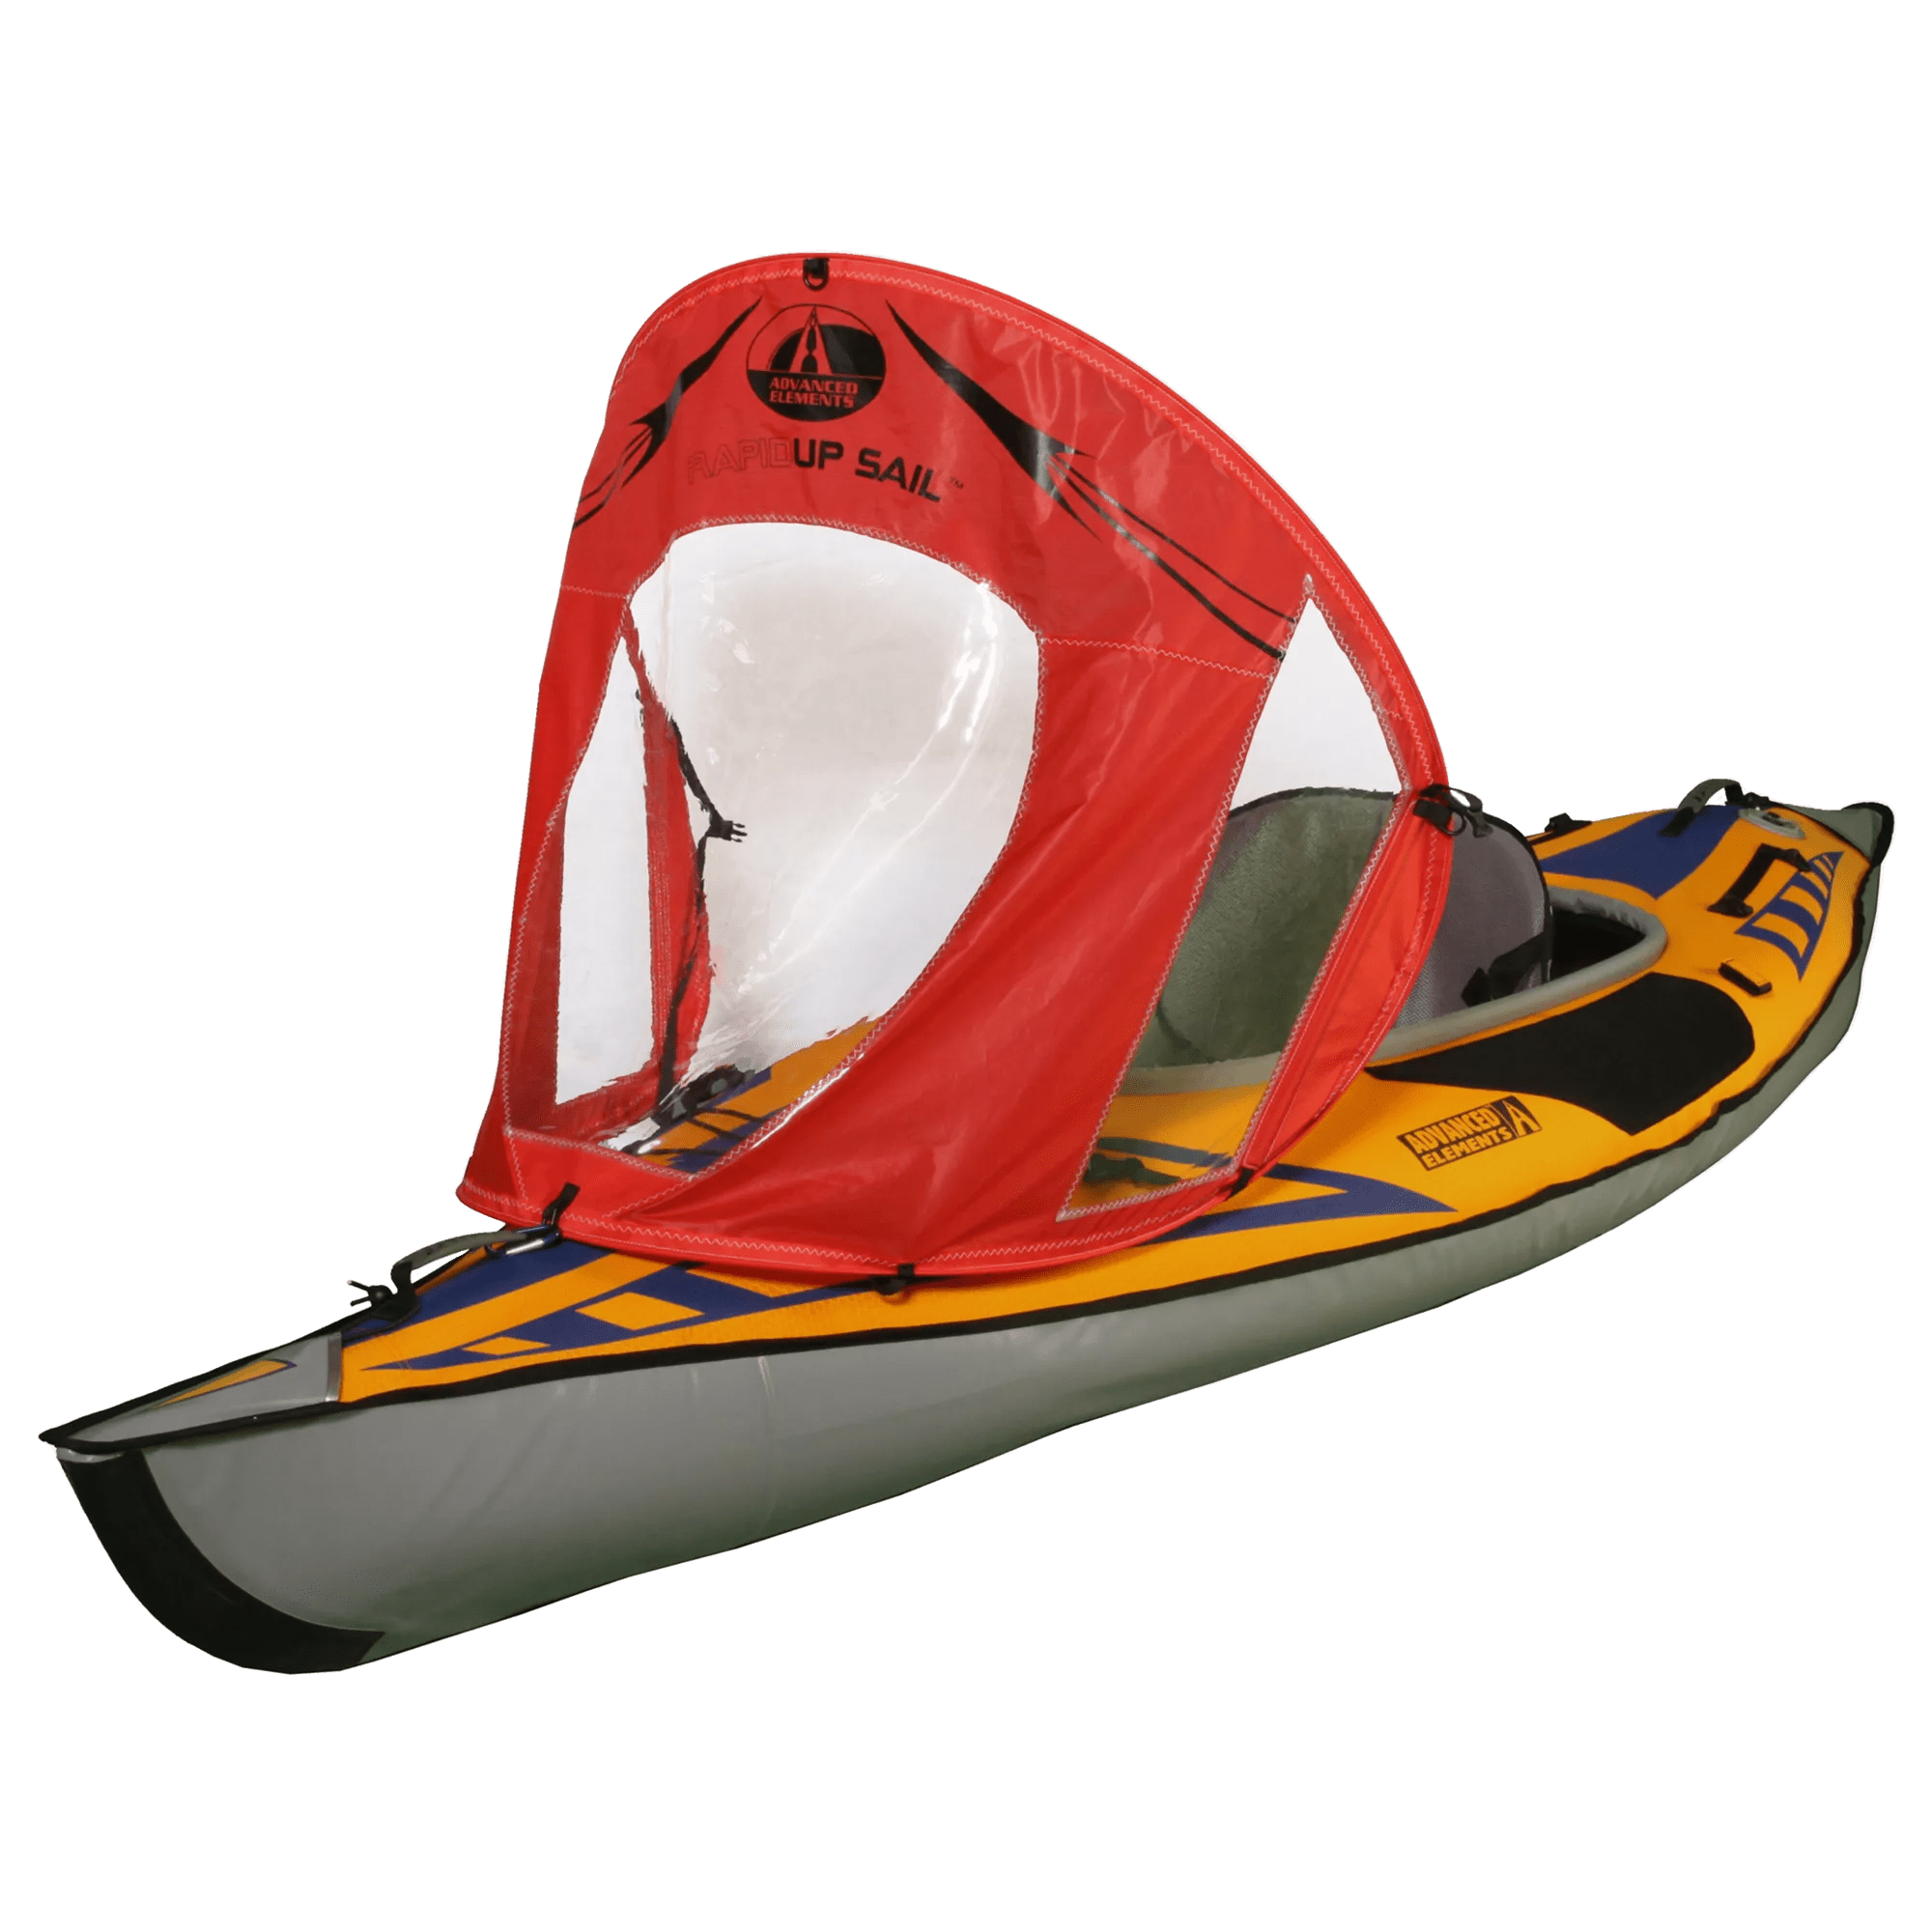 ADVANCED ELEMENTS - RapidUp® Kayak Sail - Red - AE2040 - ISO 